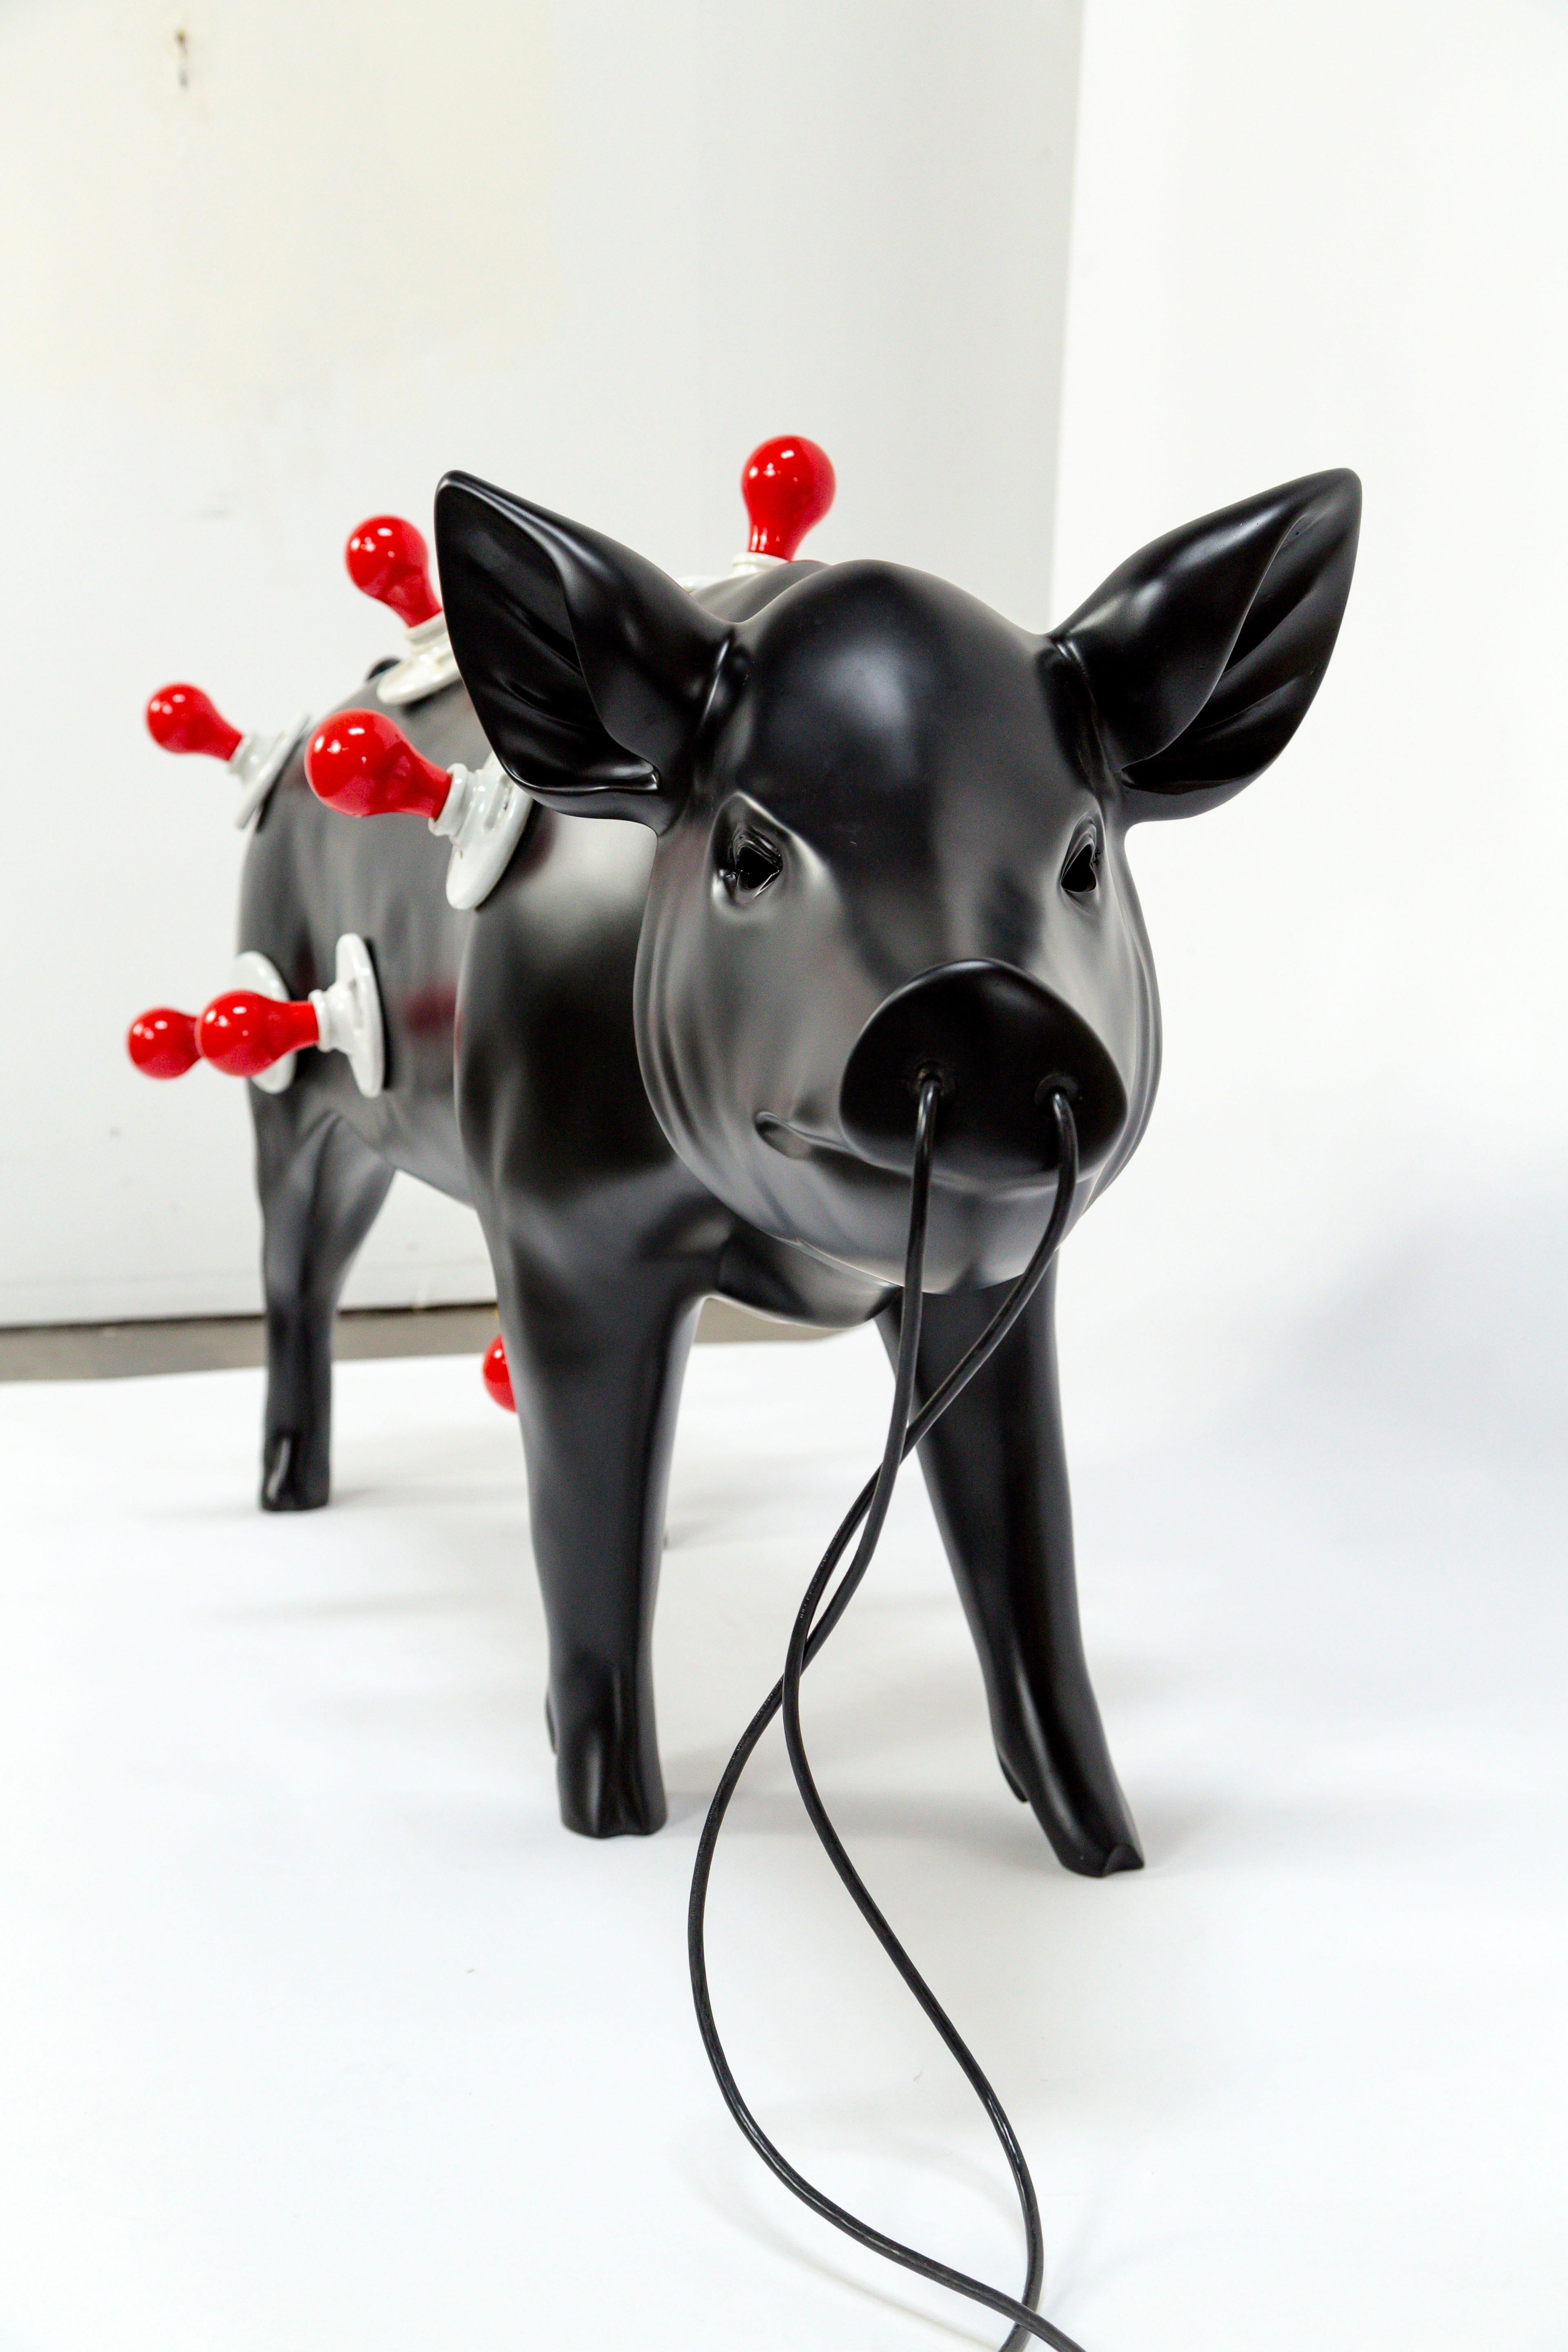 This eccentric object of sculptural lighting has a sleek, satin black finish with 13 medium base porcelain sockets, and two long cords from the animal's nose with inline switches. Piggy is a collaborative work which involved several artisans. The